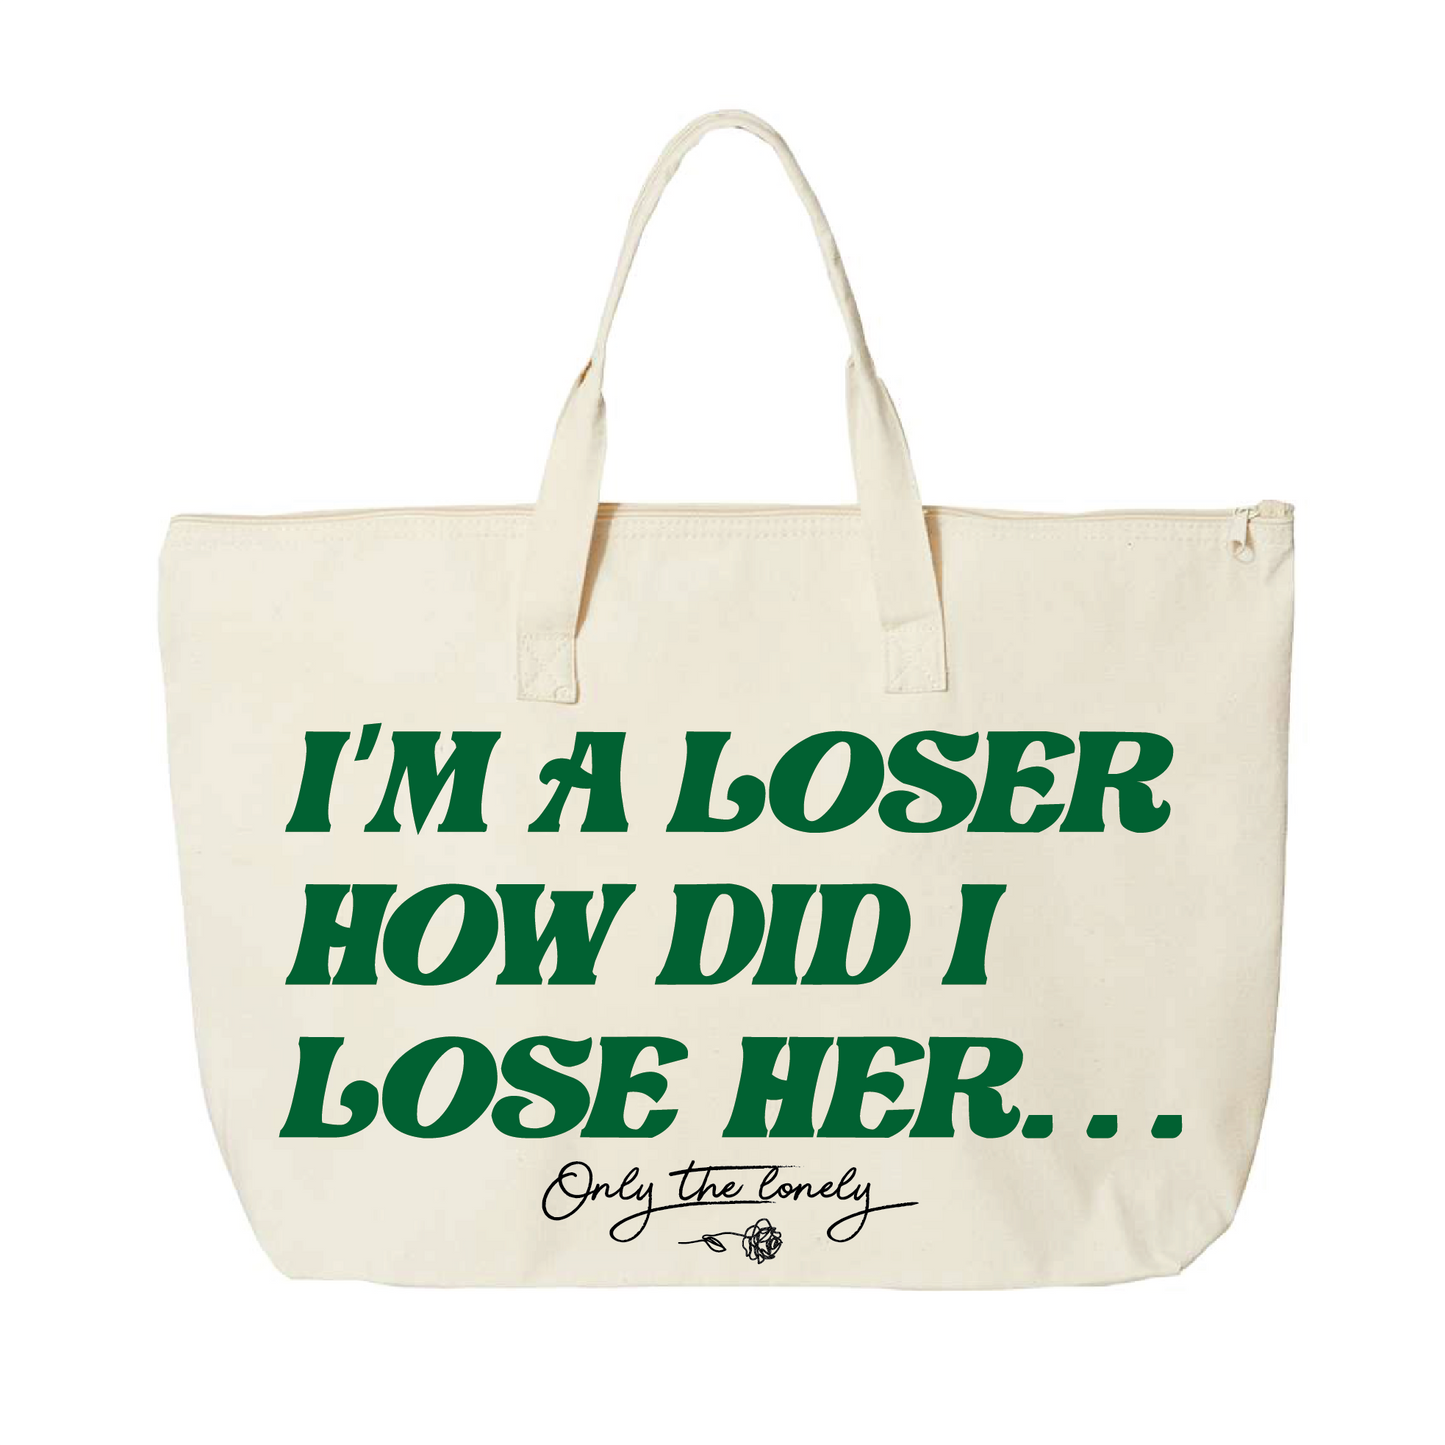 ONLY THE LONELY "I'M A LOSER HOW DID I LOSE HER" TOTE BAG